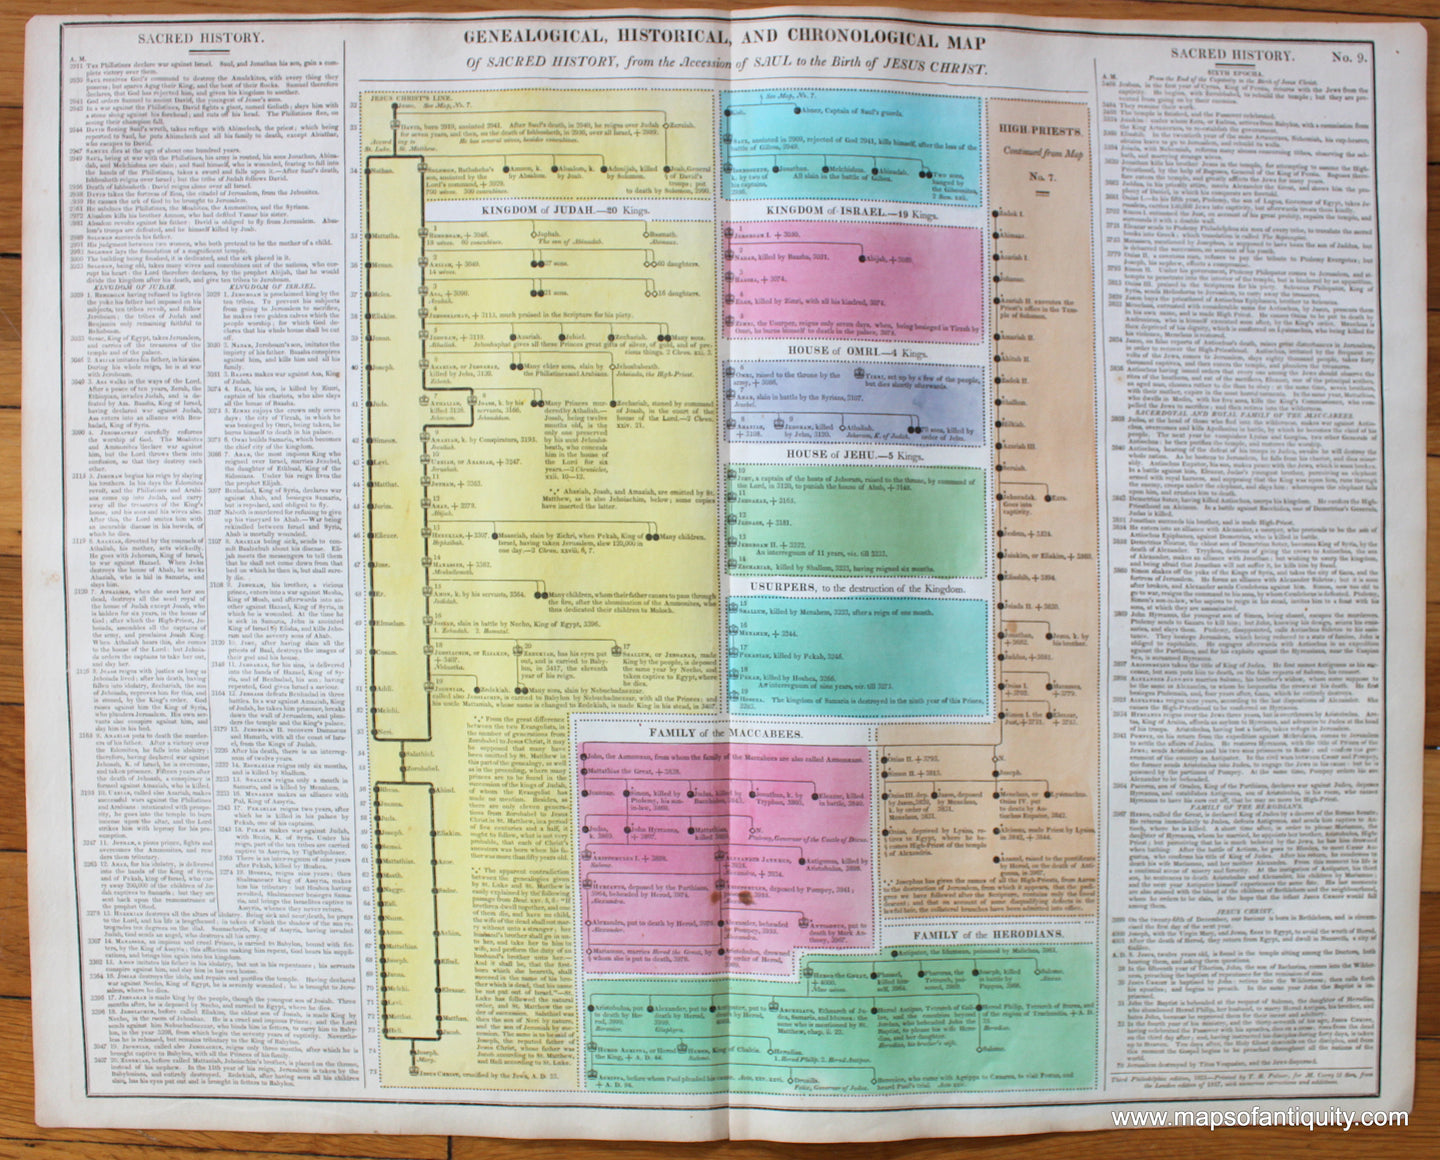 Hand-Colored-Antique-Timeline-Geneological-Historical-and-Chronological-Map-of-Sacred-History-from-the-Accession-of-Saul-to-the-Birth-of-Jesus-Christ.-No.-9-Other--1821-Lavoisne-Maps-Of-Antiquity